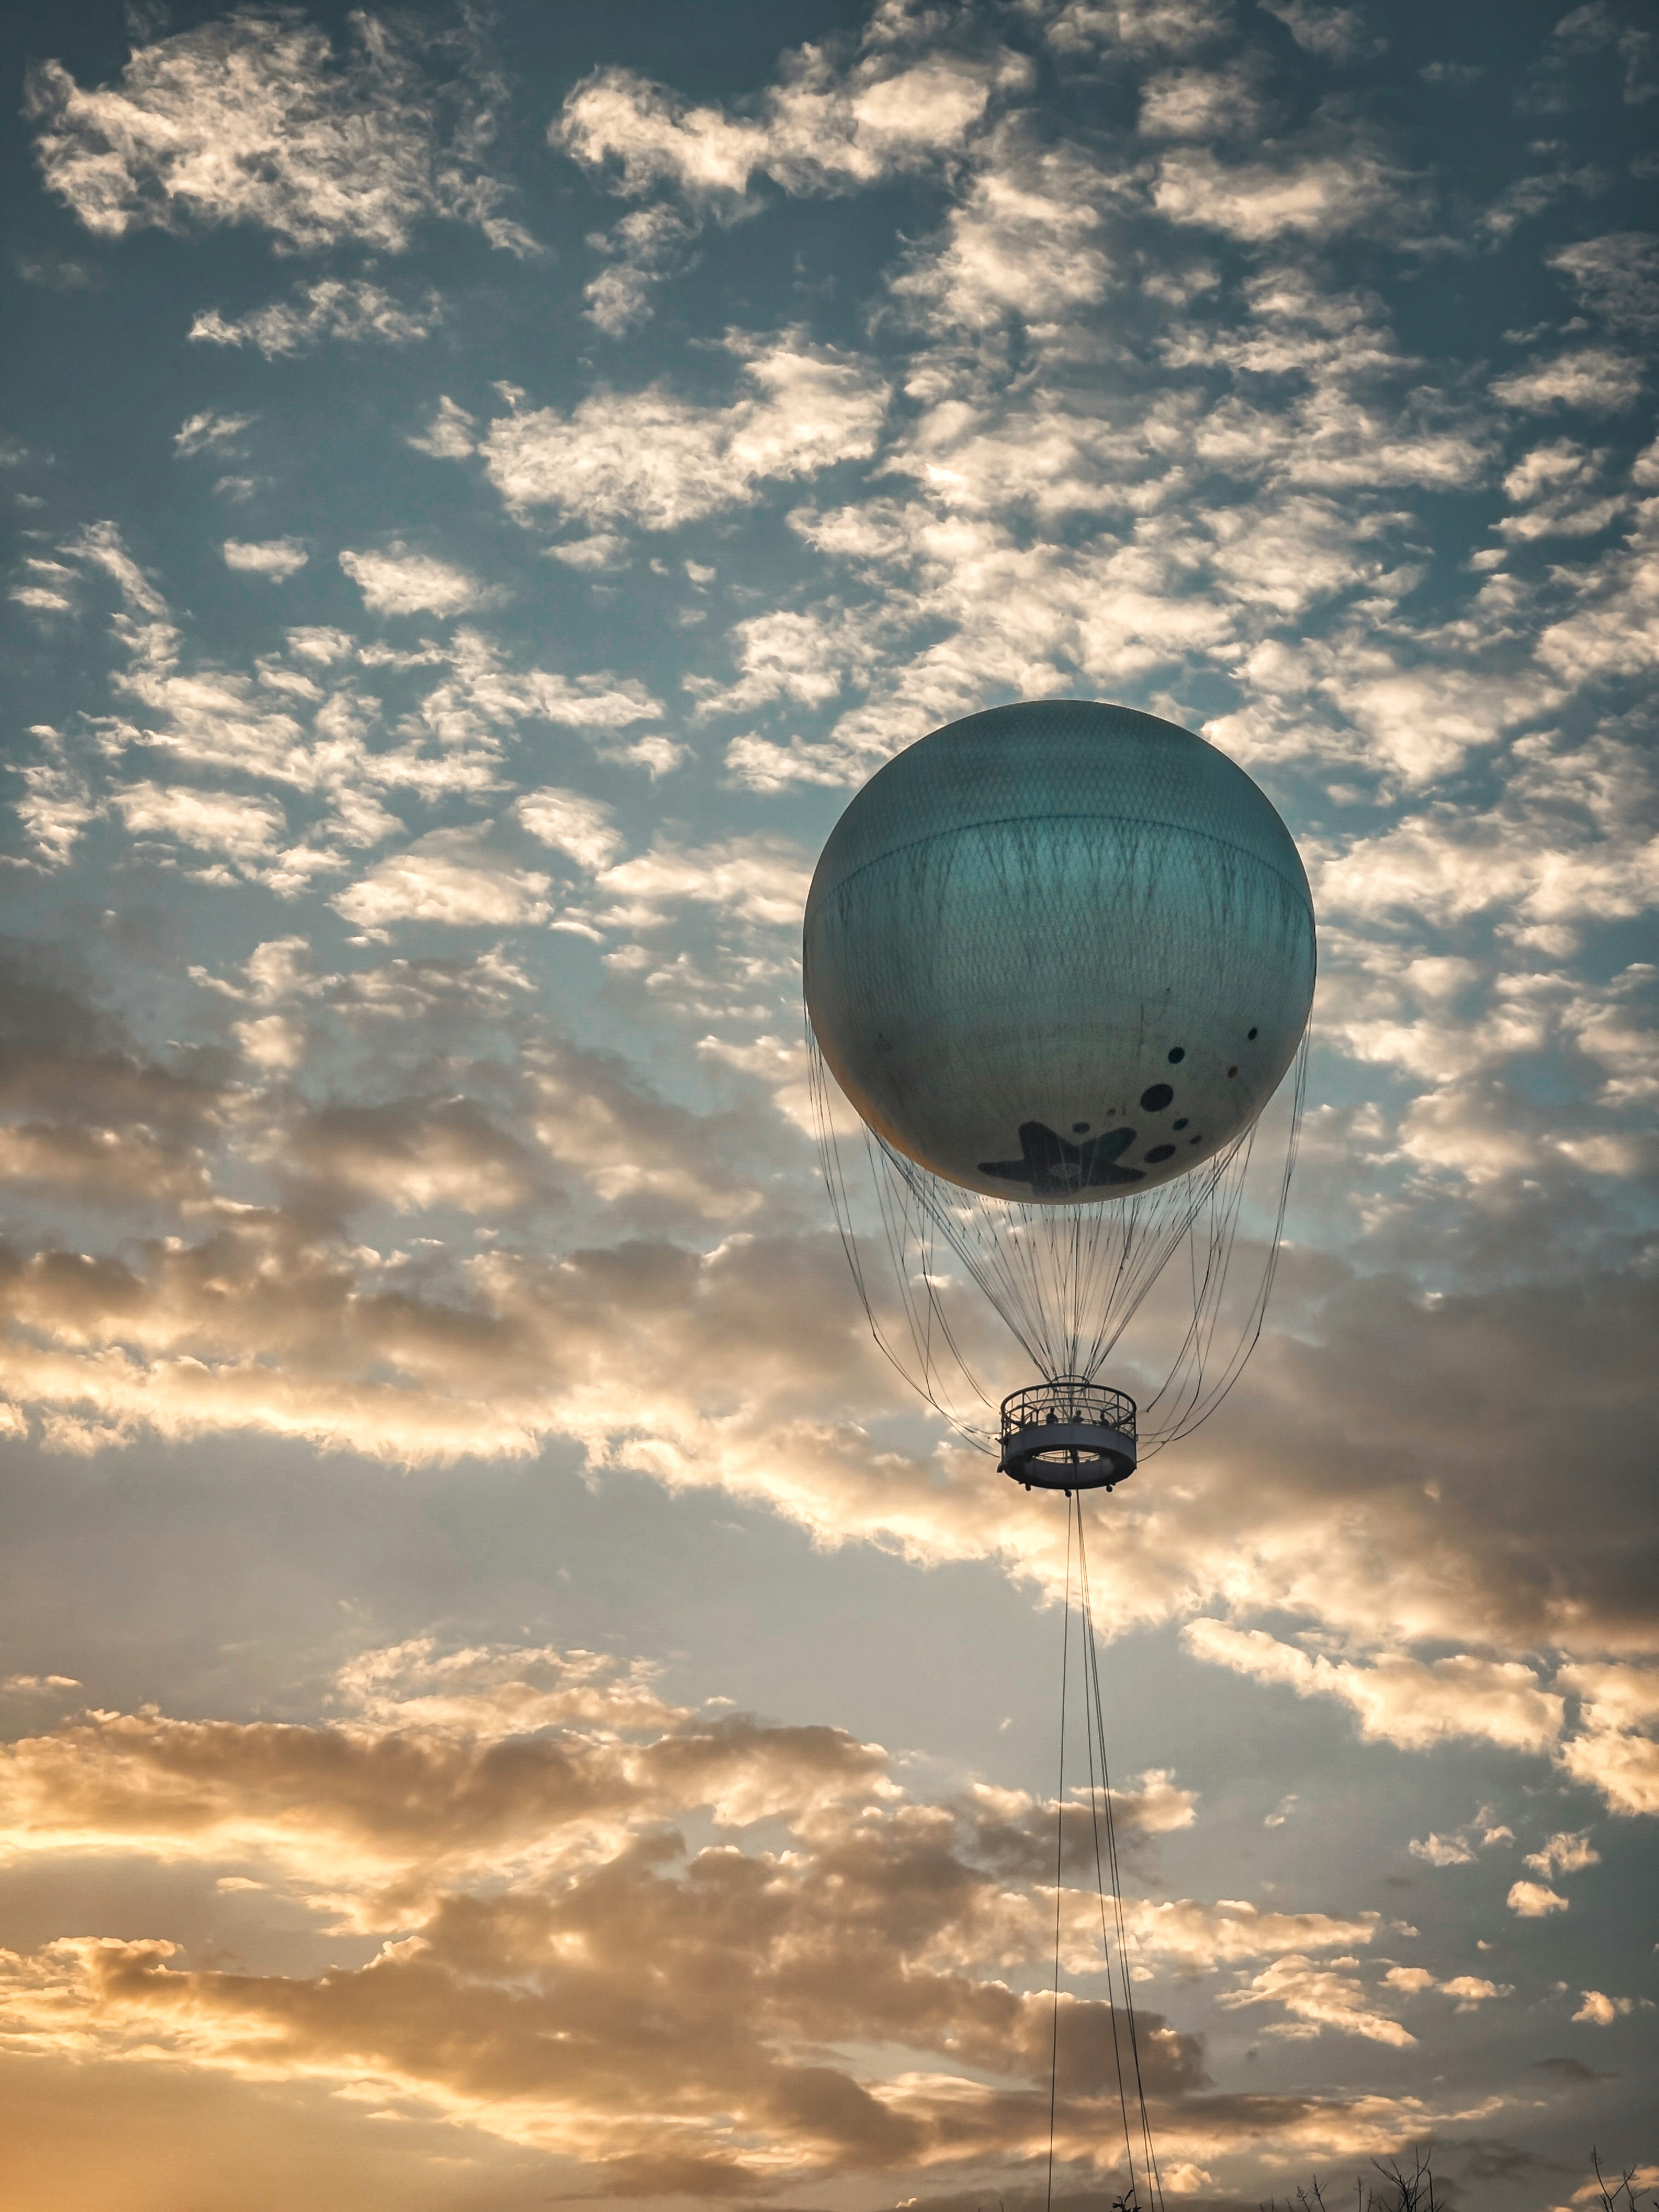 A hot air balloon in front of a sunset